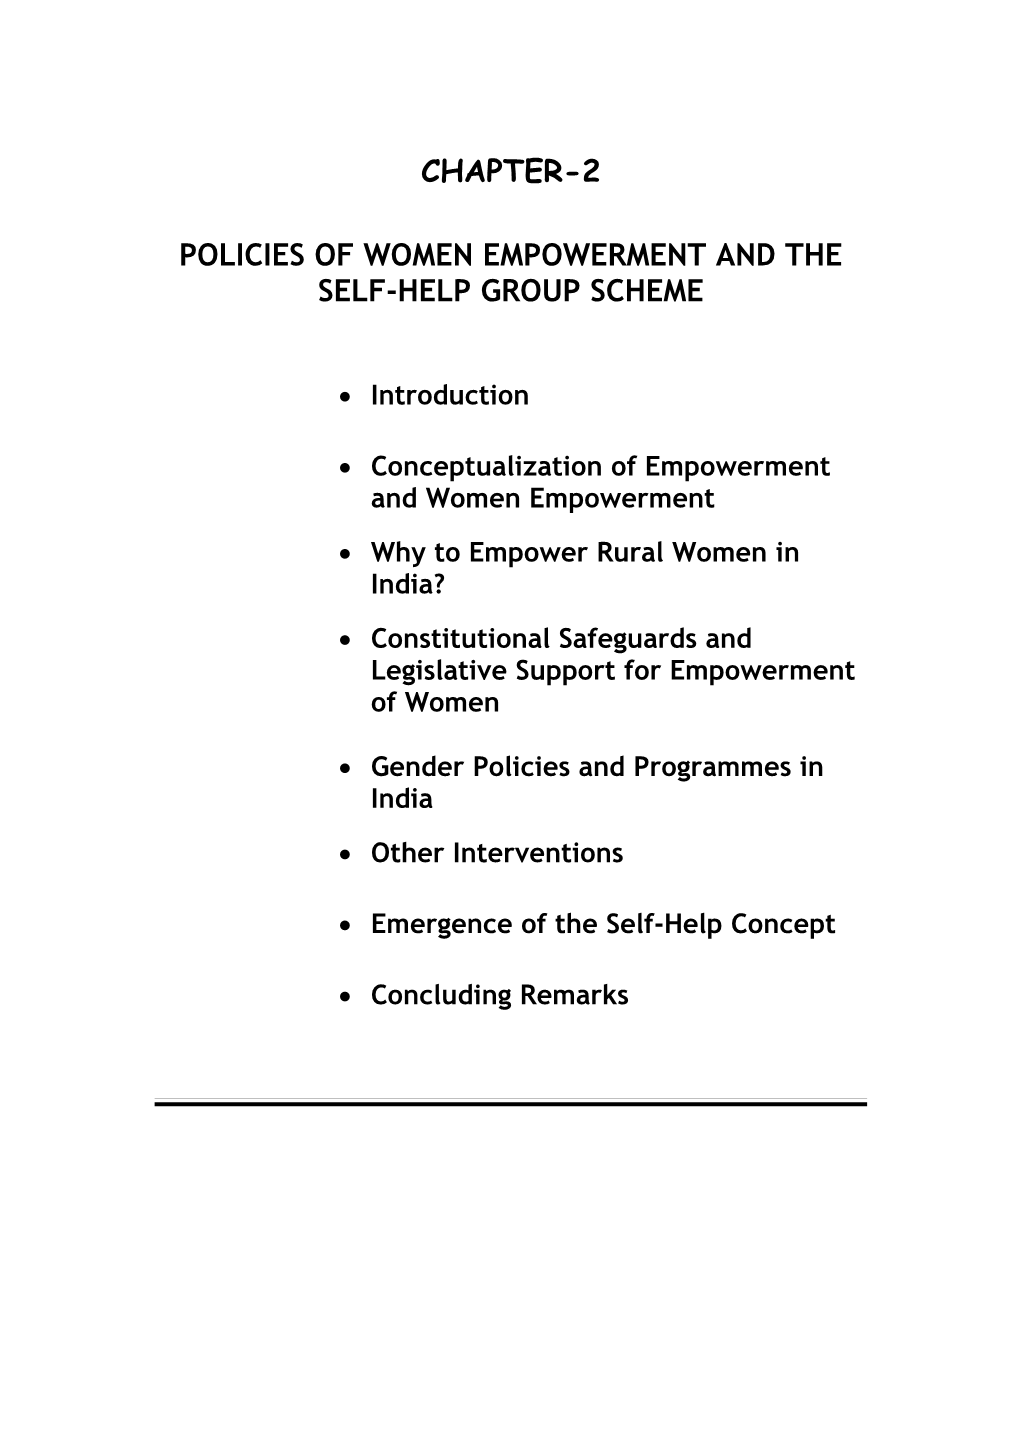 Policy of Women Empowerment and the Self-Help Group Scheme